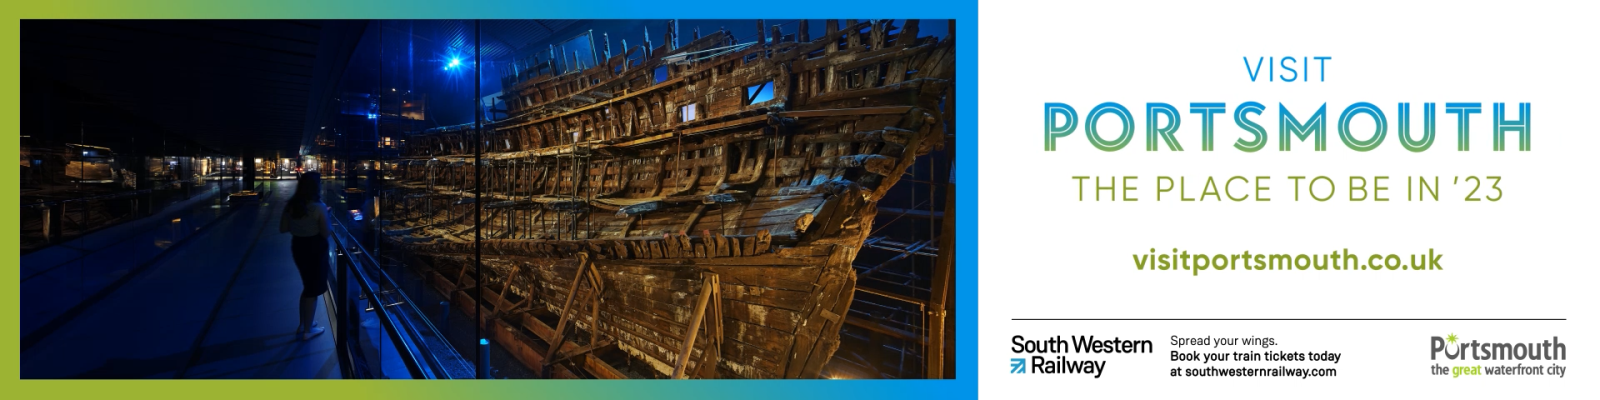 Photograph of the Mary Rose alongside the wording: Visit Portsmouth: The place to be in '23